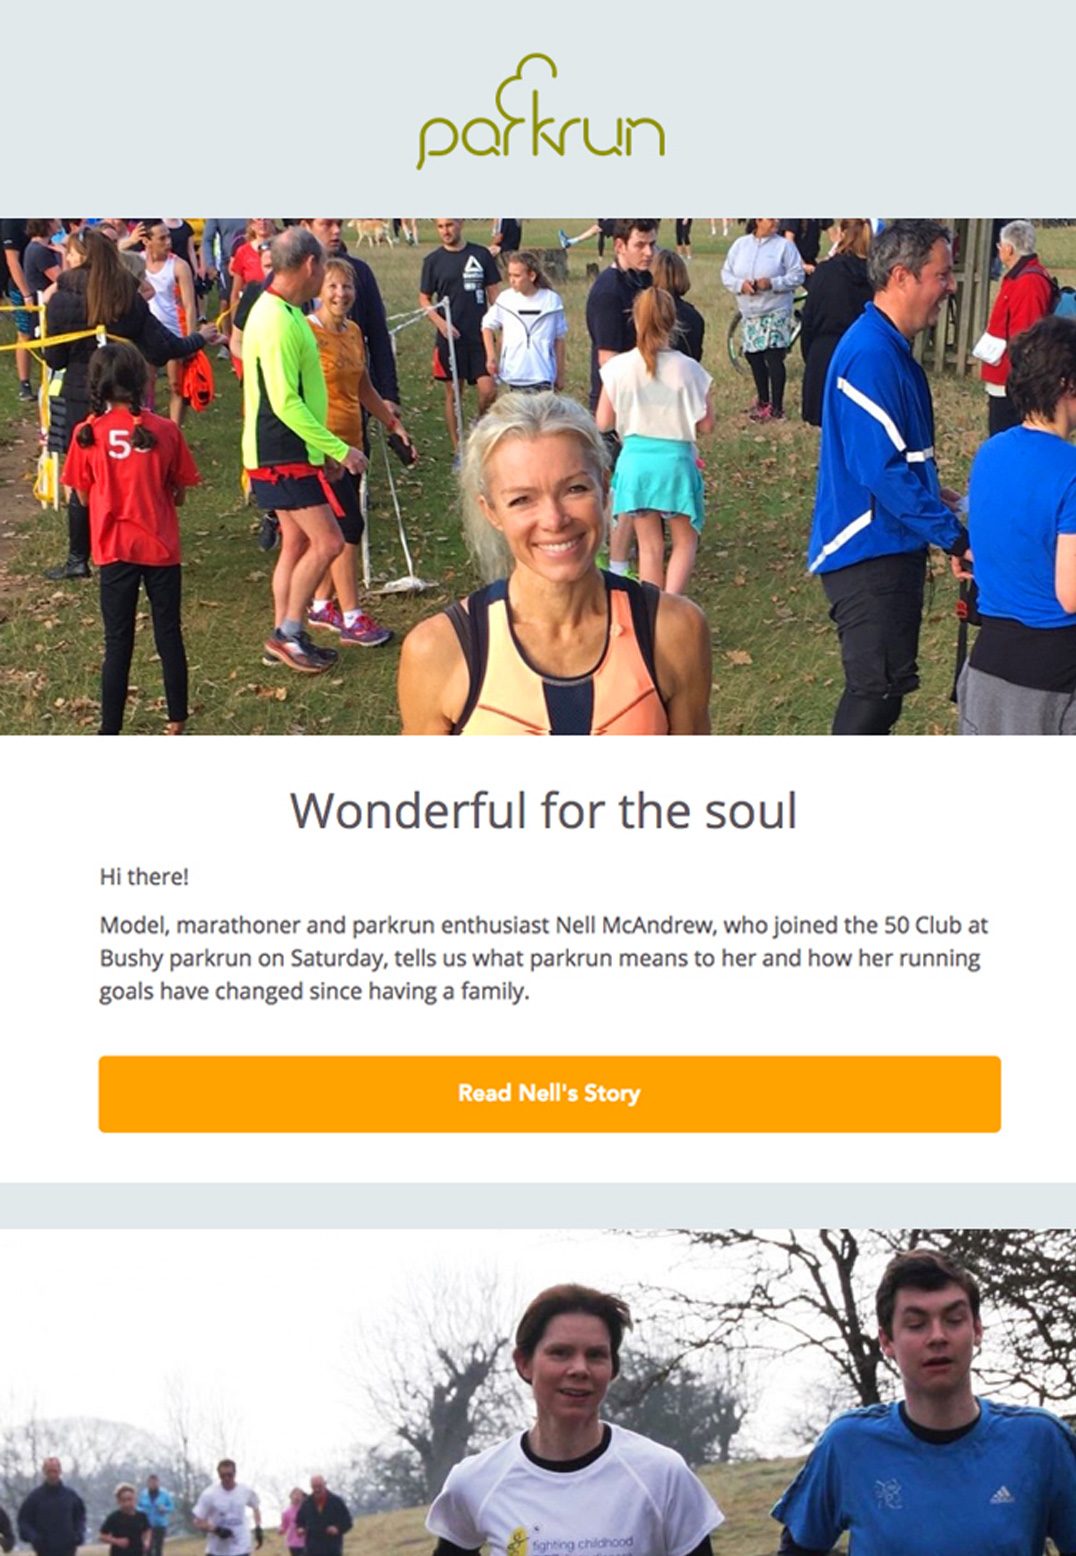 Parkrun – Compelling Email Newsletter Copy